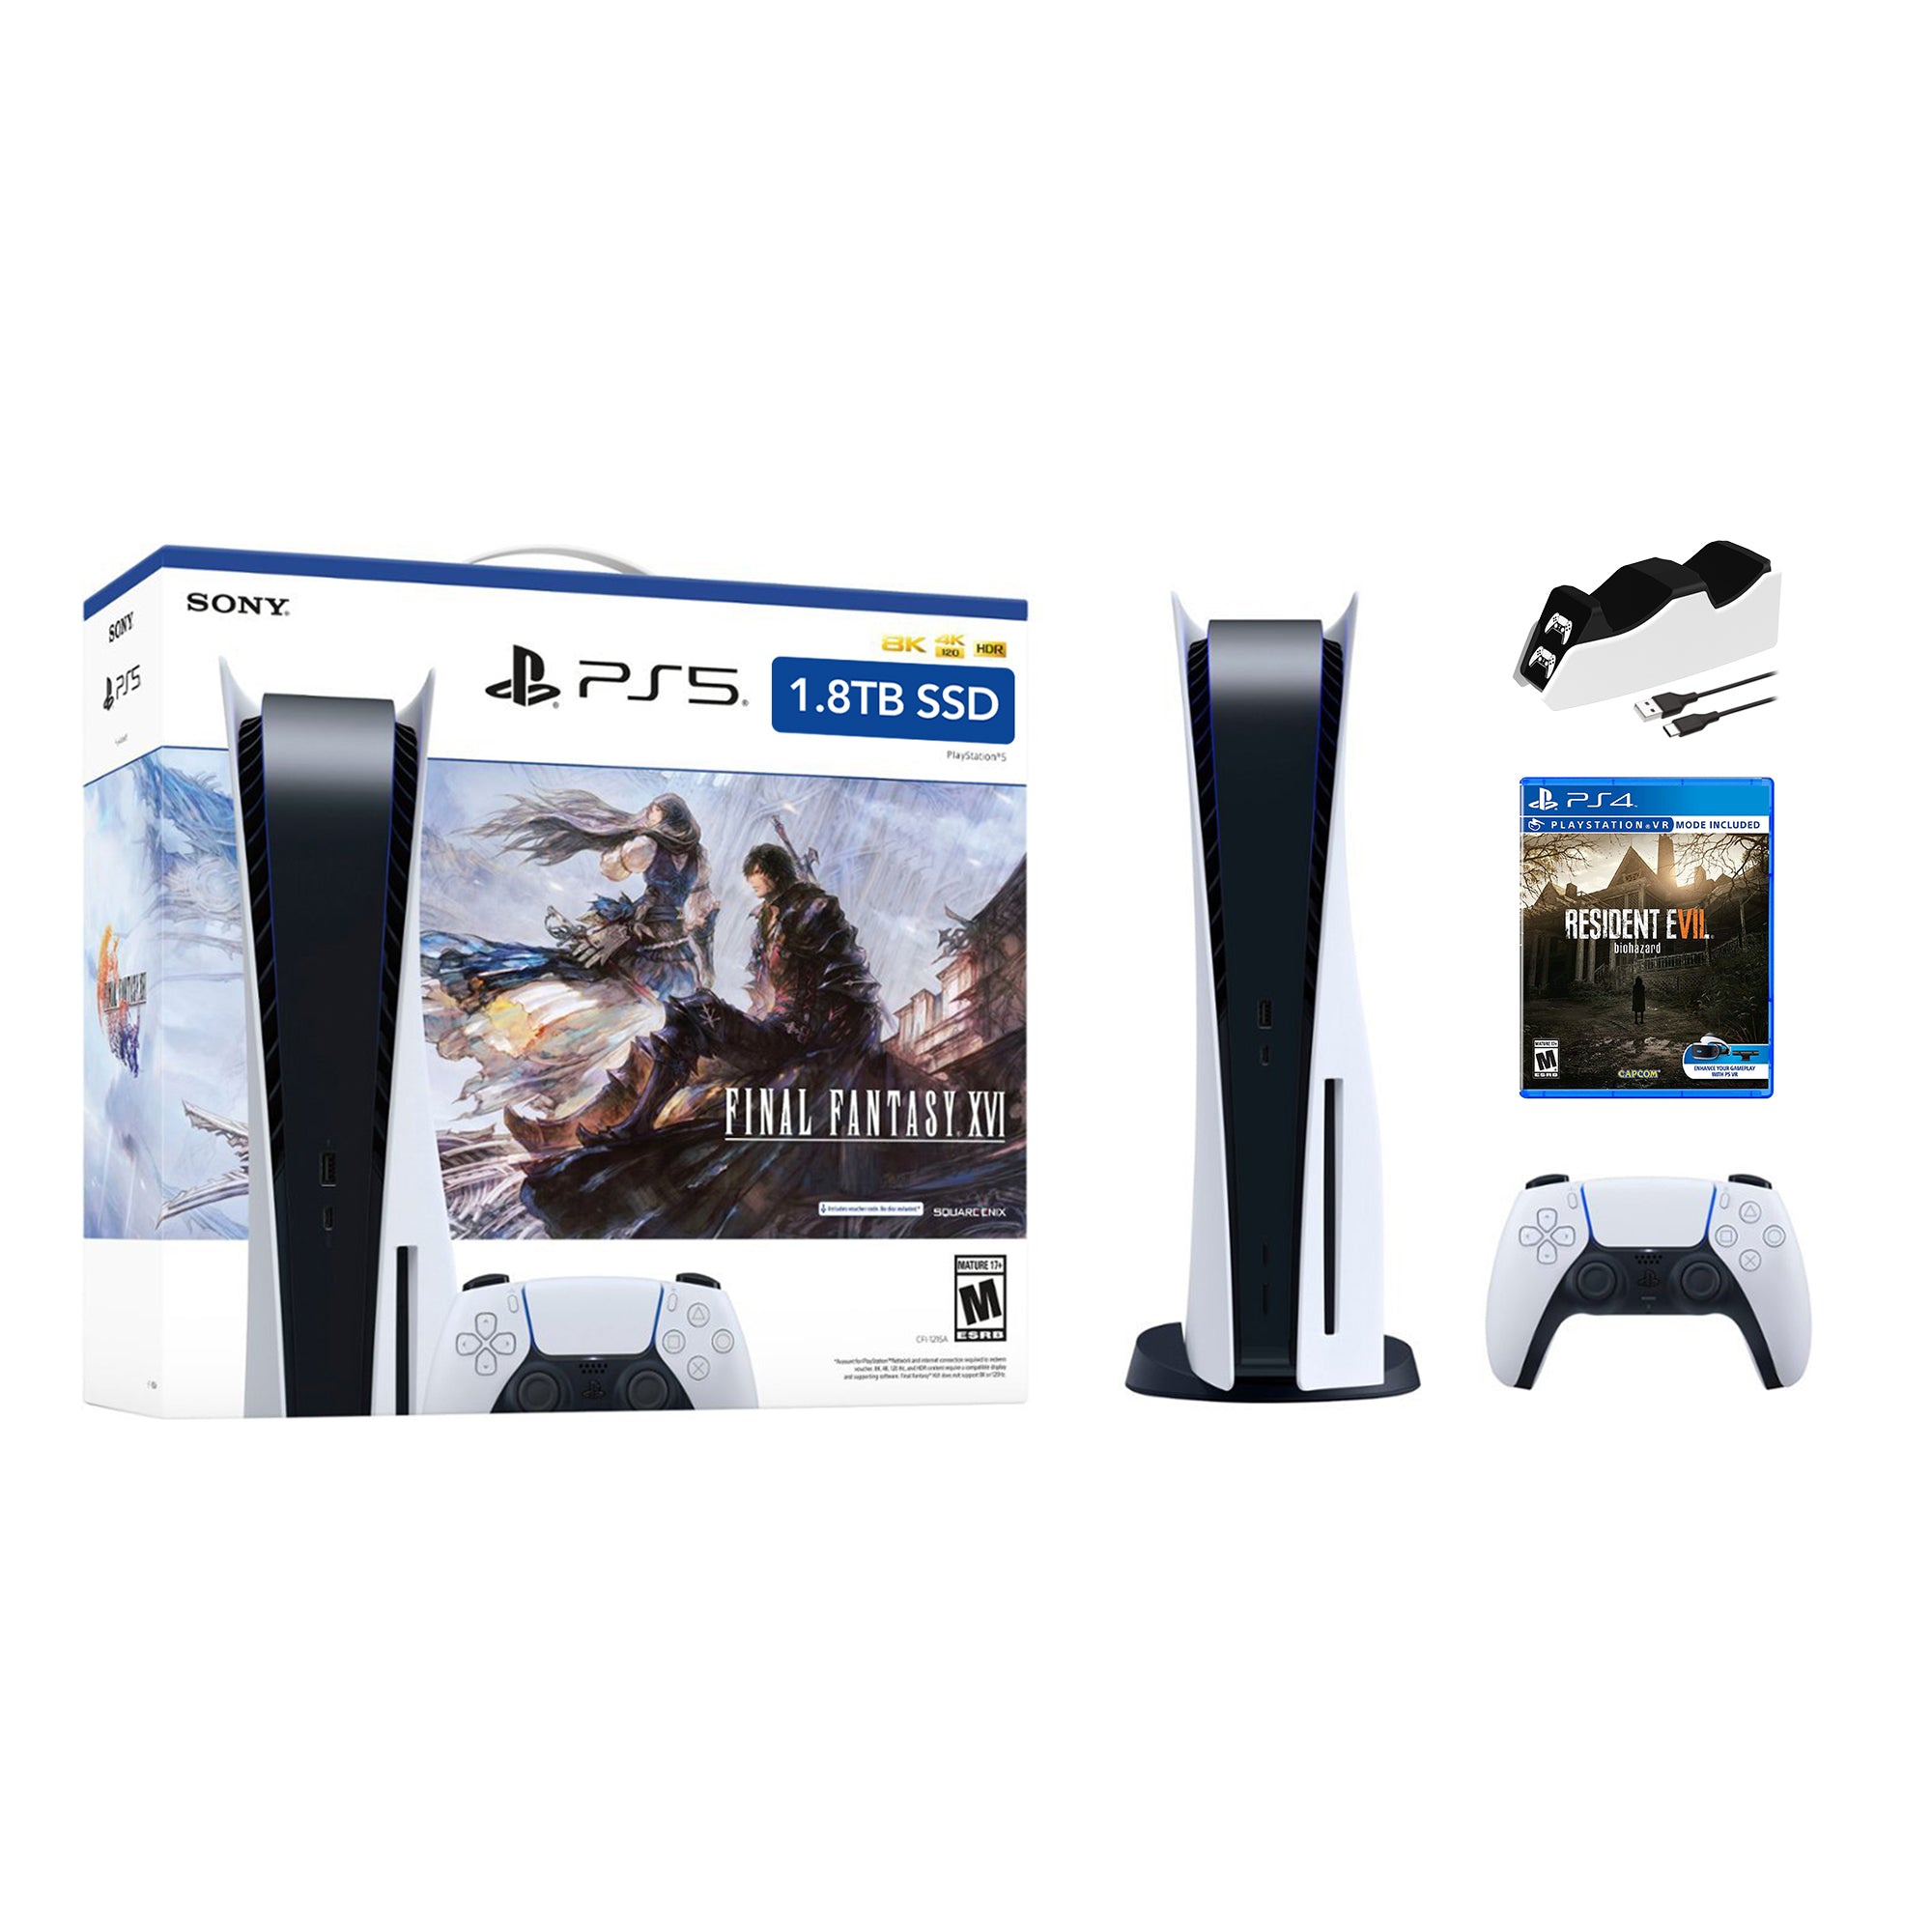 PlayStation 5 Upgraded 1.8TB Disc Edition FINAL FANTASY XVI Bundle with Resident Evil 7 and Mytrix Controller Charger - PS5, White